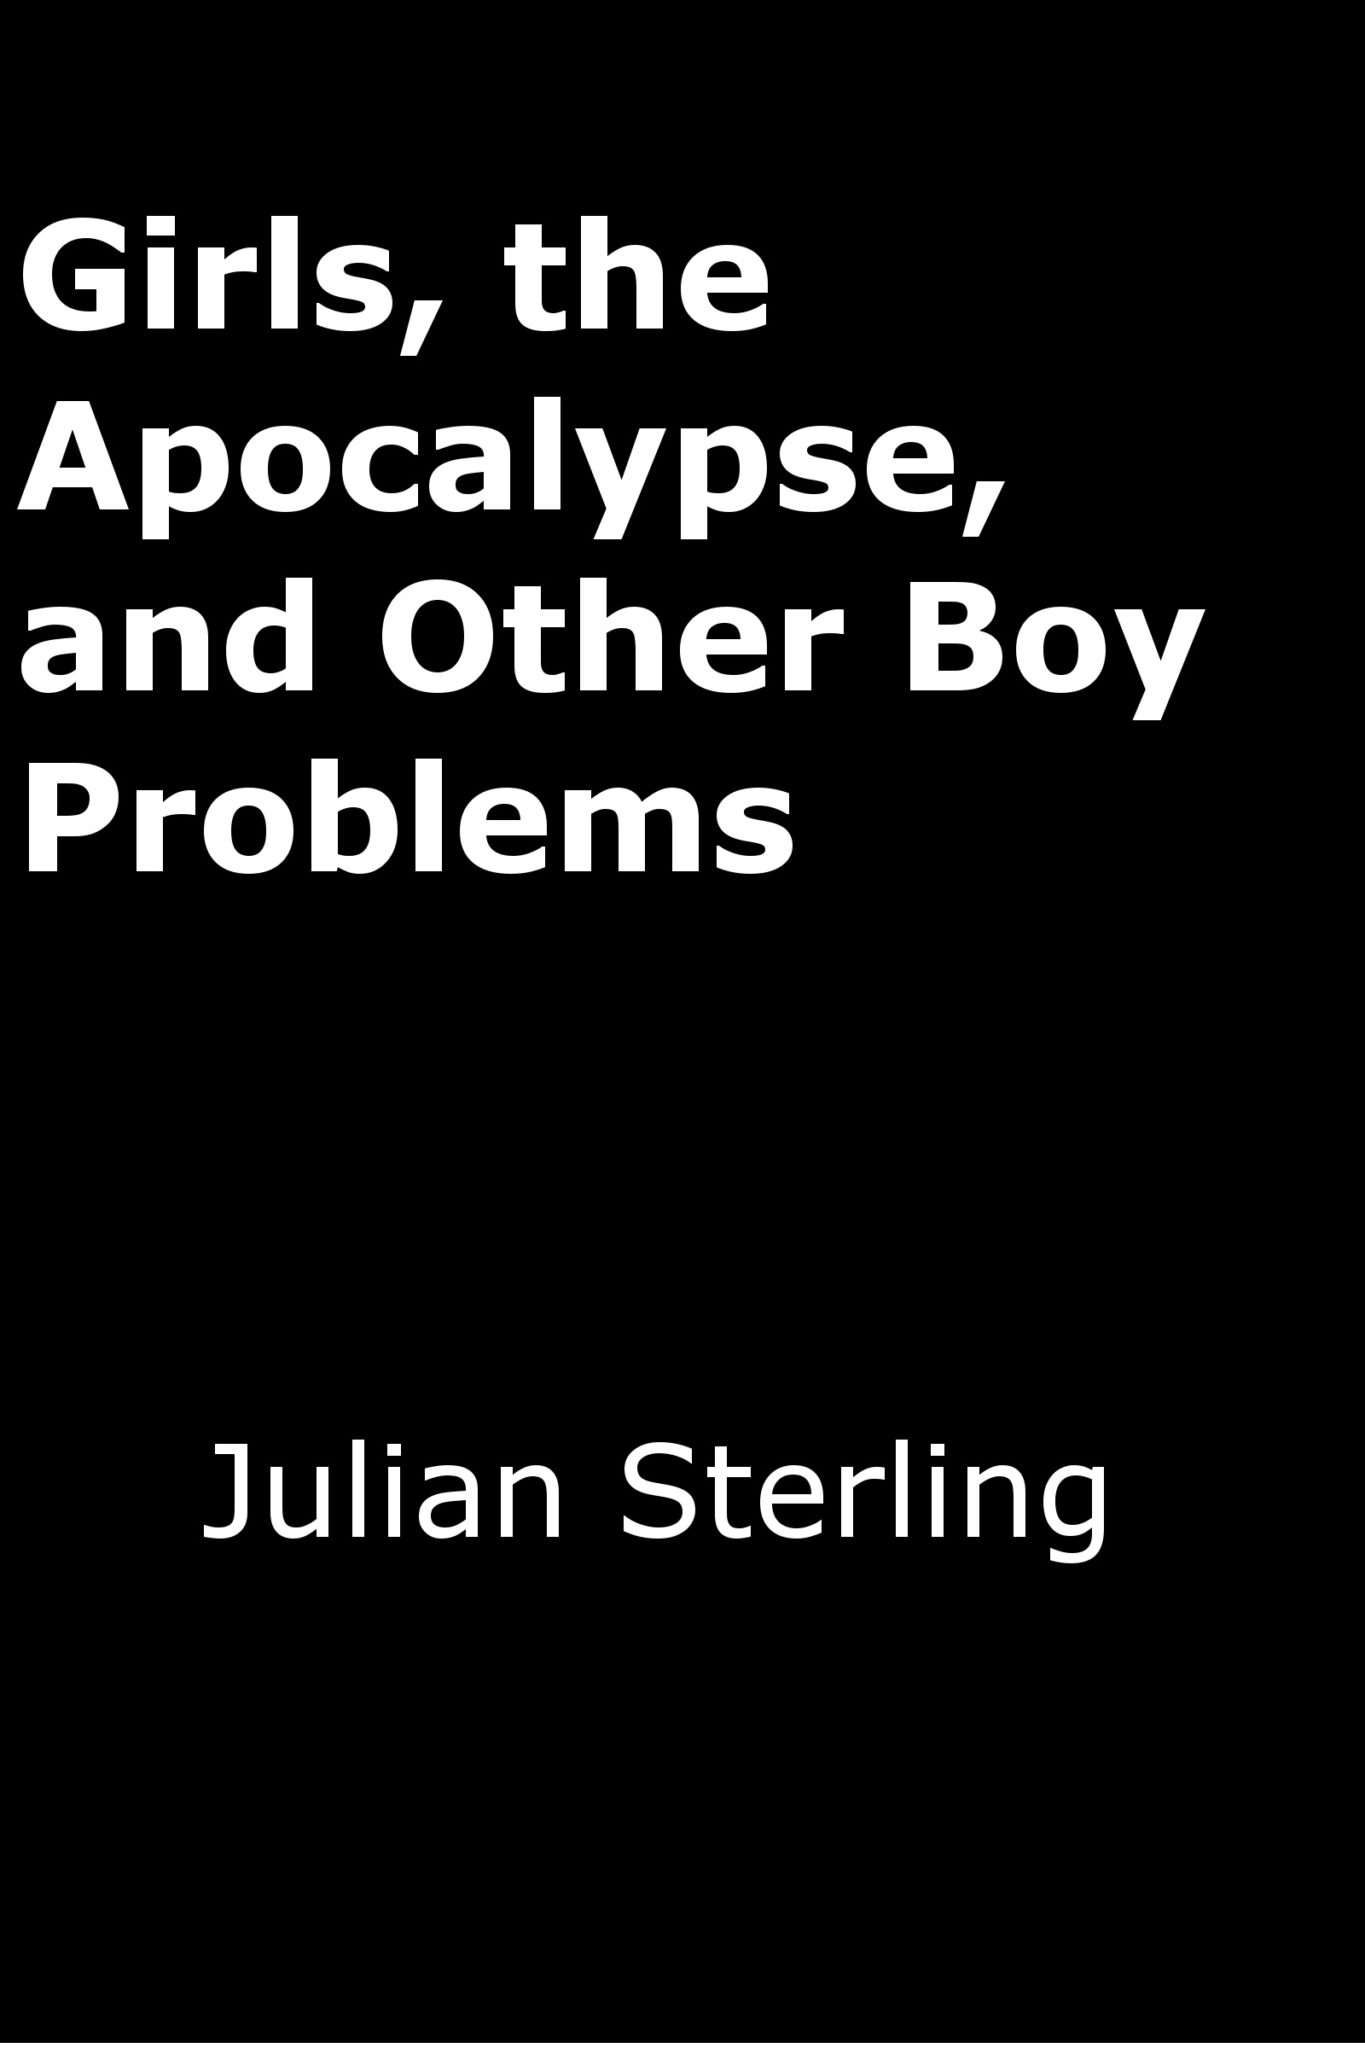 FREE: Girls, the Apocalypse, and Other Boy Problems by Julian Sterling